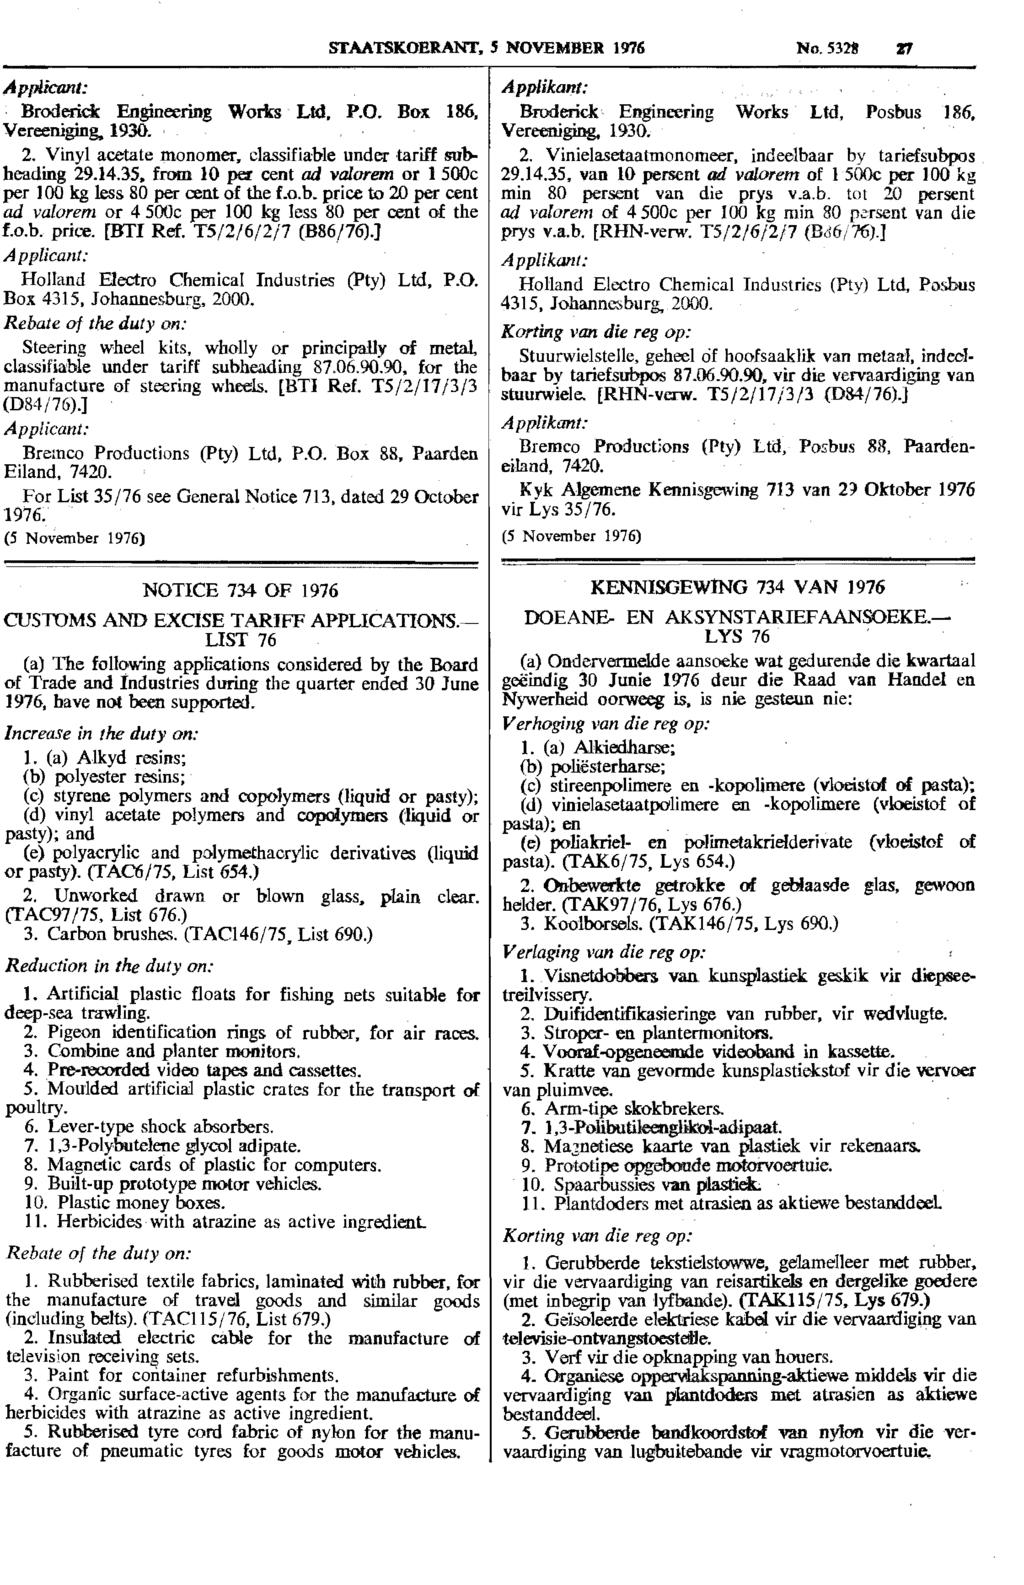 Reproduced by abinet Online in terms of Government Printer s Copyright Authority No. 10505 dated 02 February 1998 l'aatkoe.rant.5 NOVEMBER 1976 No.32t1 Applicant: Broderick Engineering Works Ltd, P.O. B&x 186.